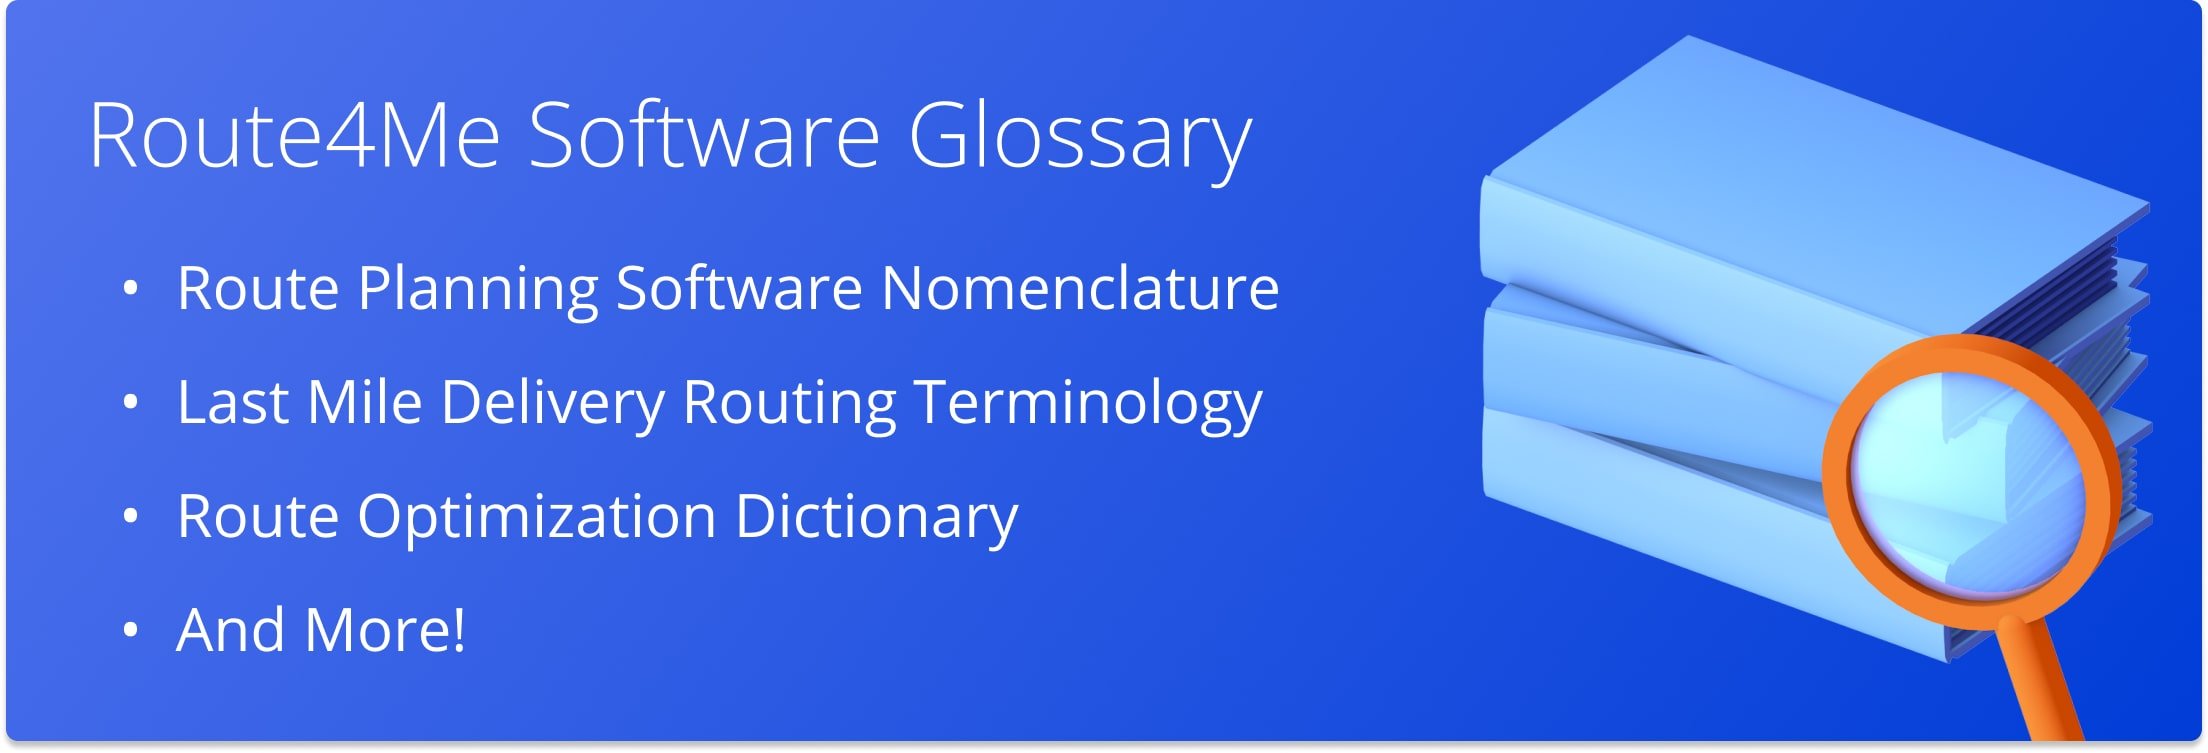 Route4Me's Glossary provides last mile route optimization software nomenclature, route planning terminology, and more.